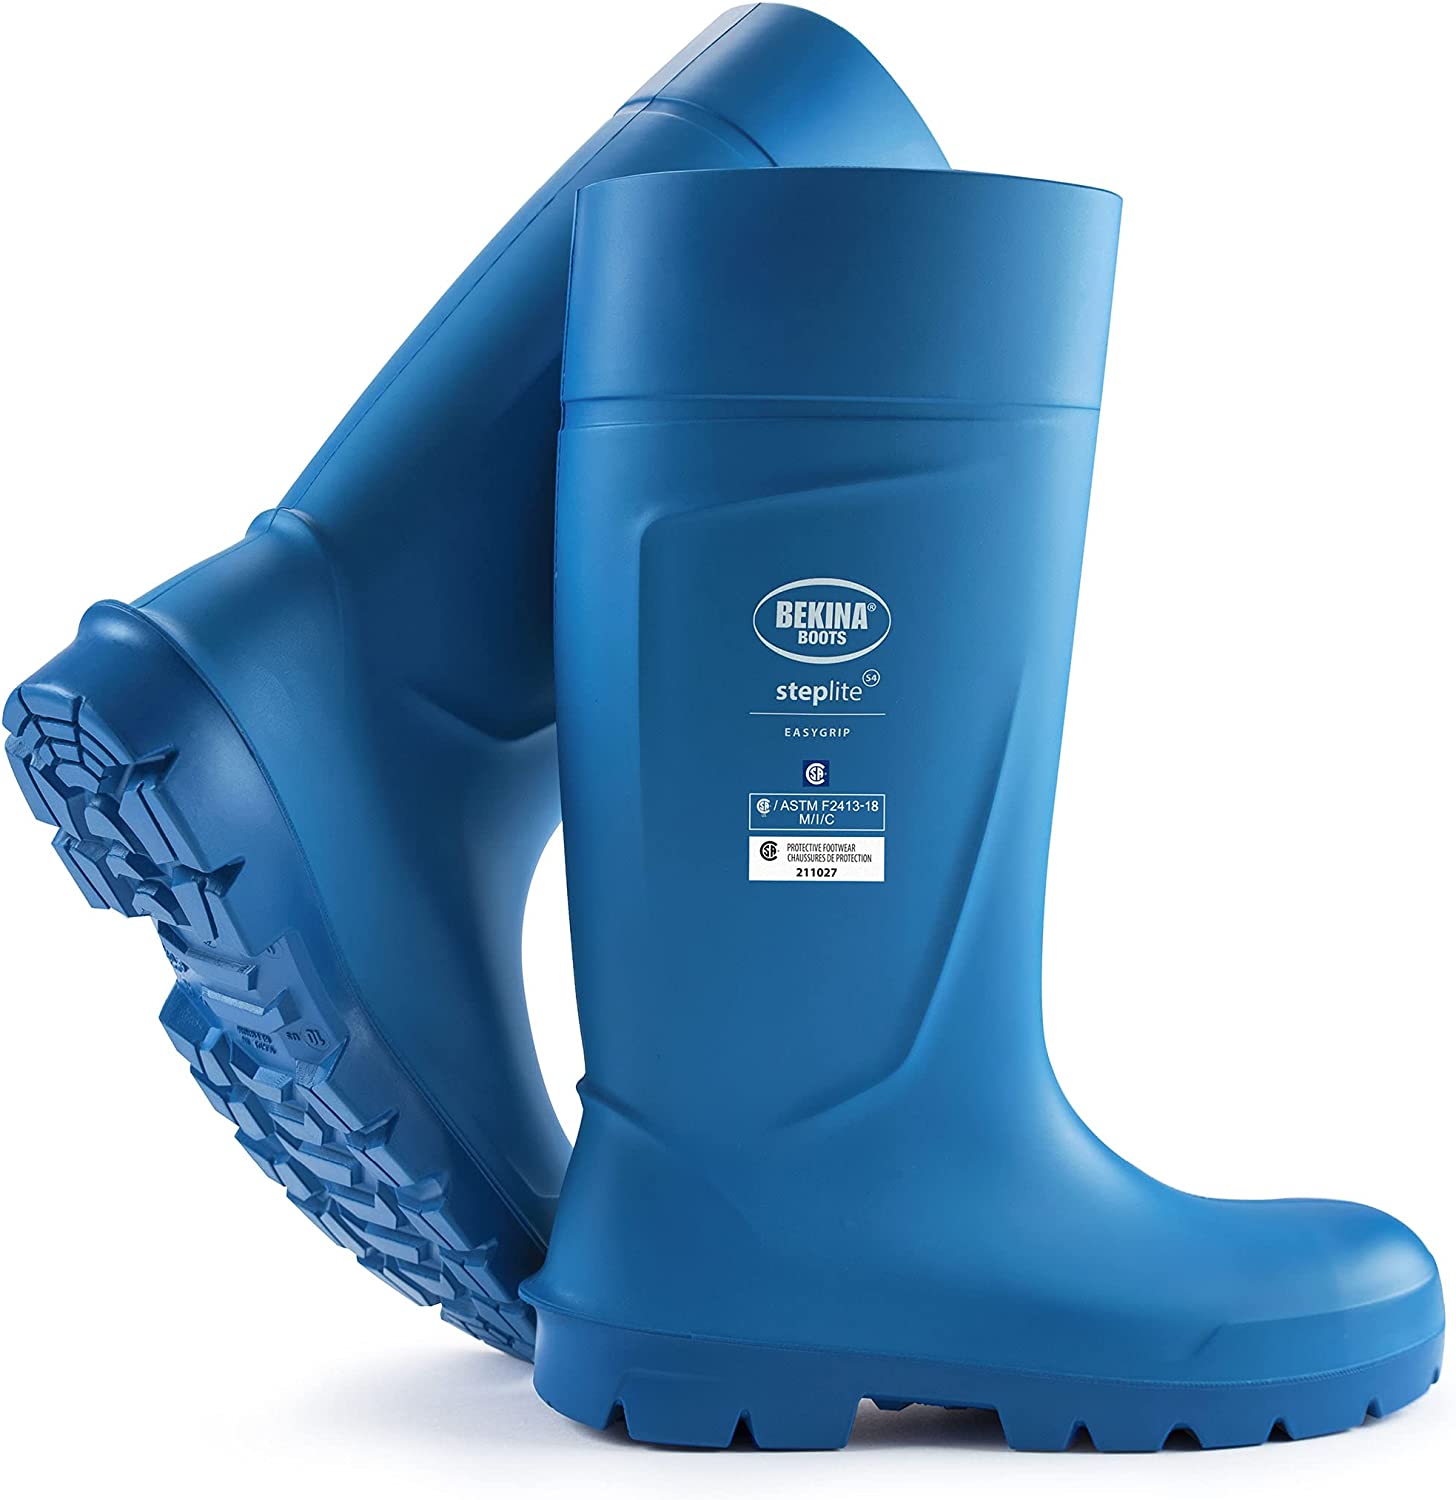 Steplite Easygrip S4 Metal Safety Toe Cap Work Boots in Blue/Blue from the side view